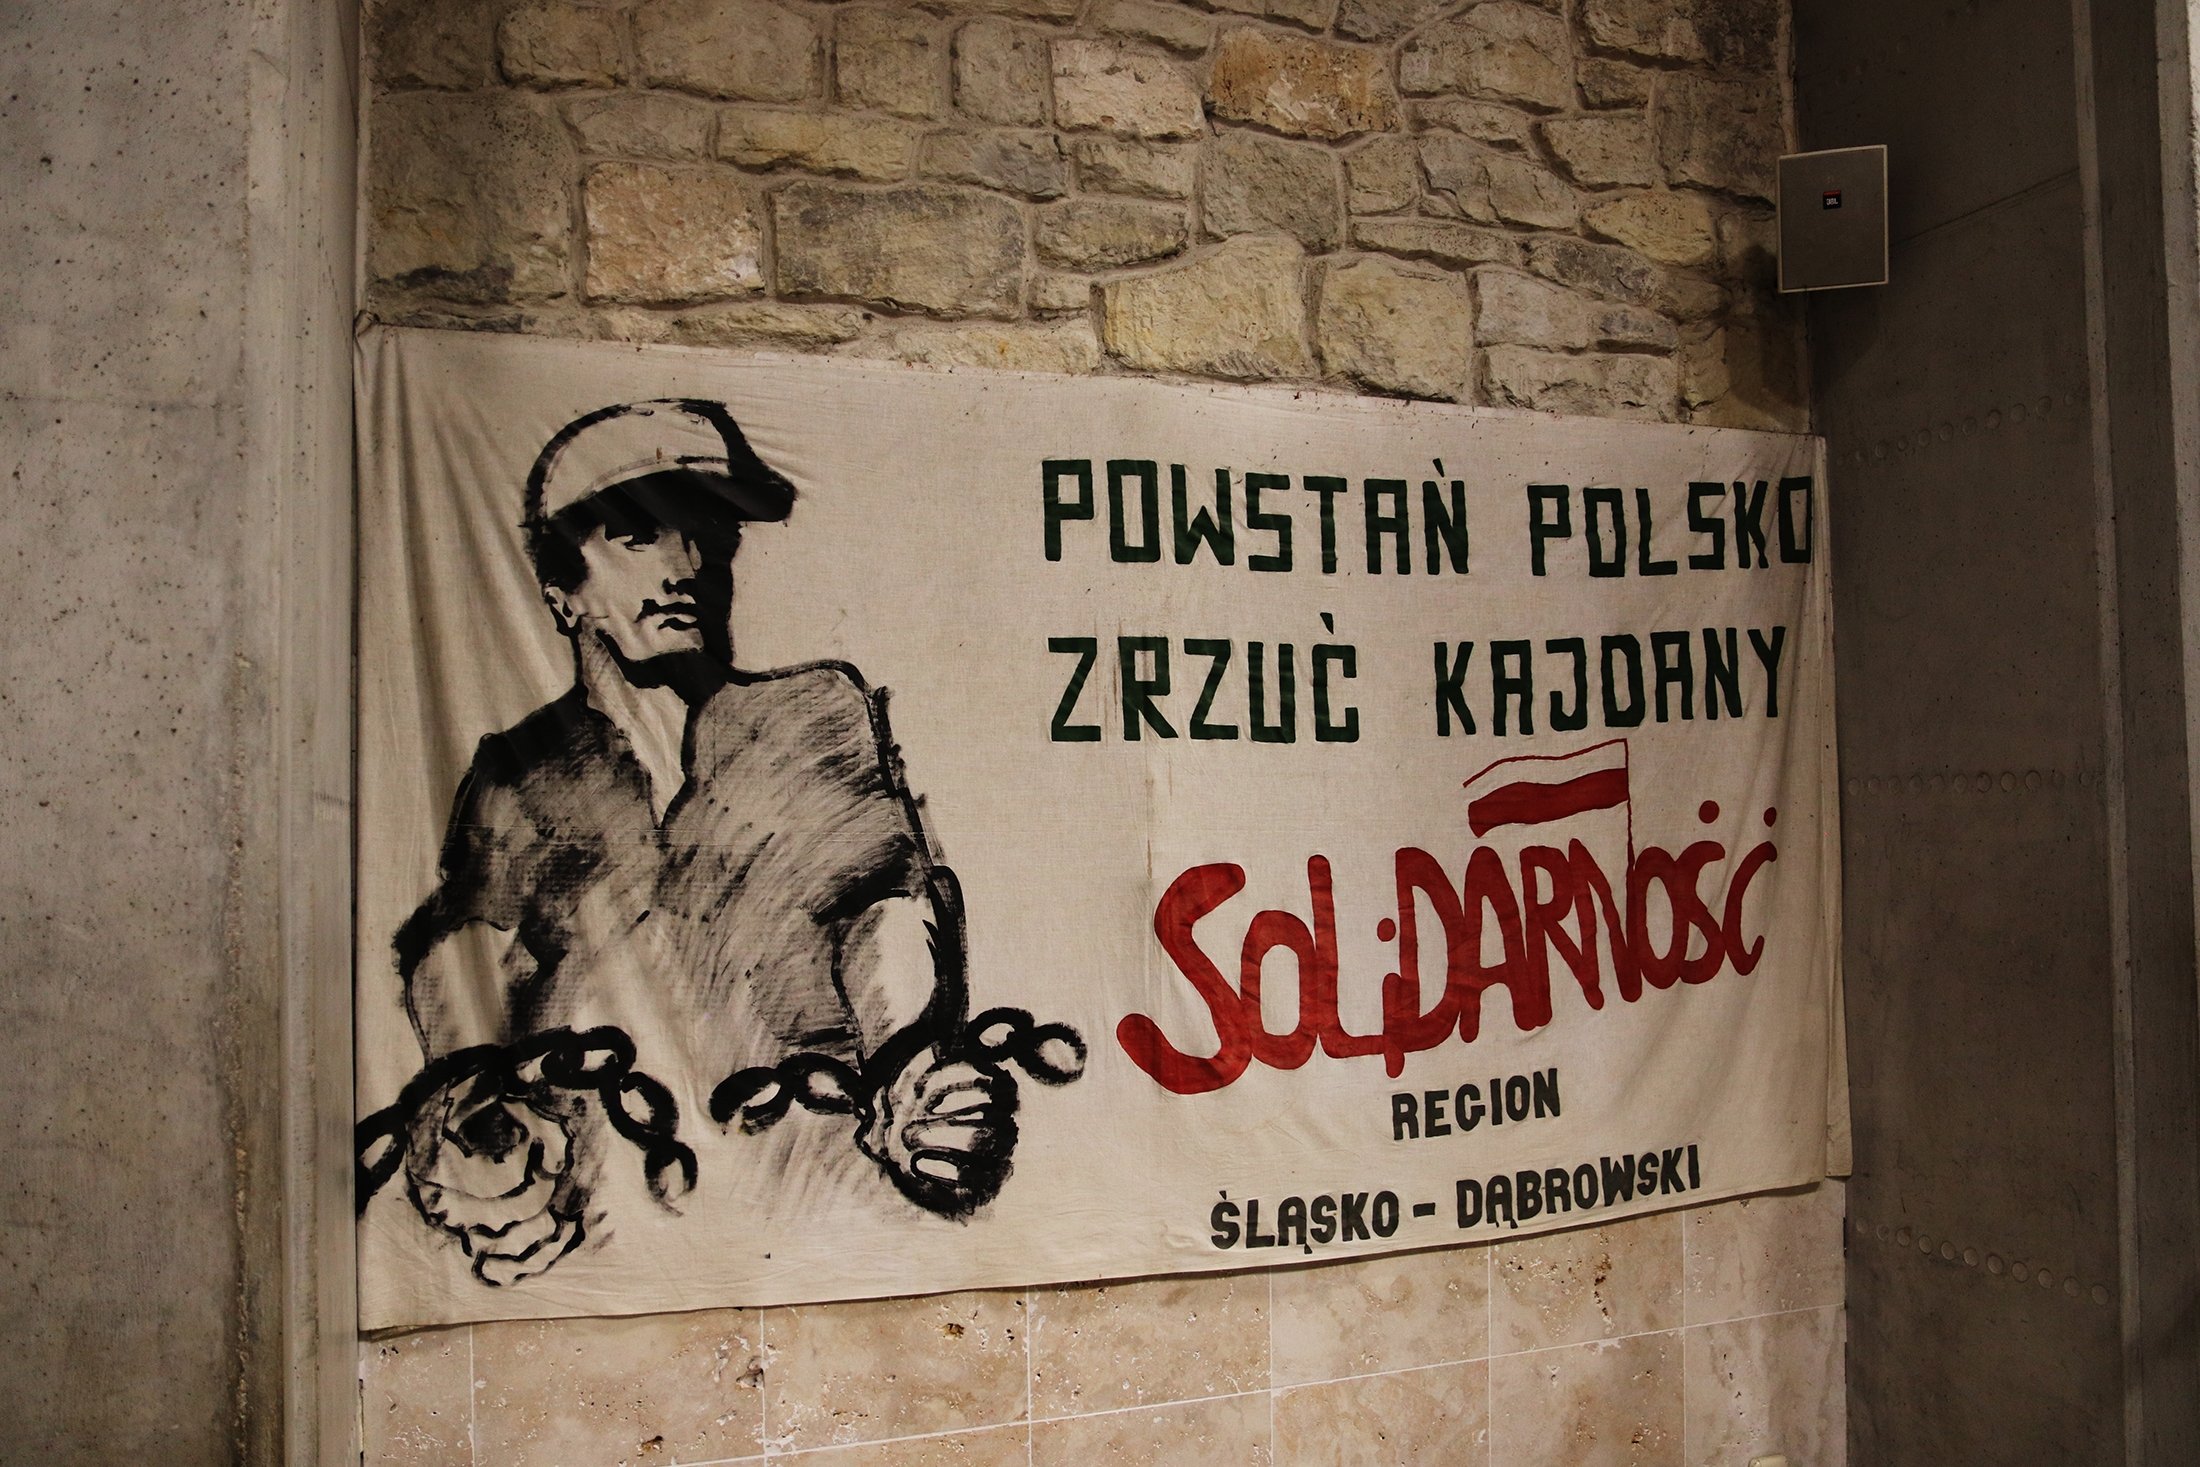 The flag of the trade union Solidarity in Poland. (Shutterstock Photo)